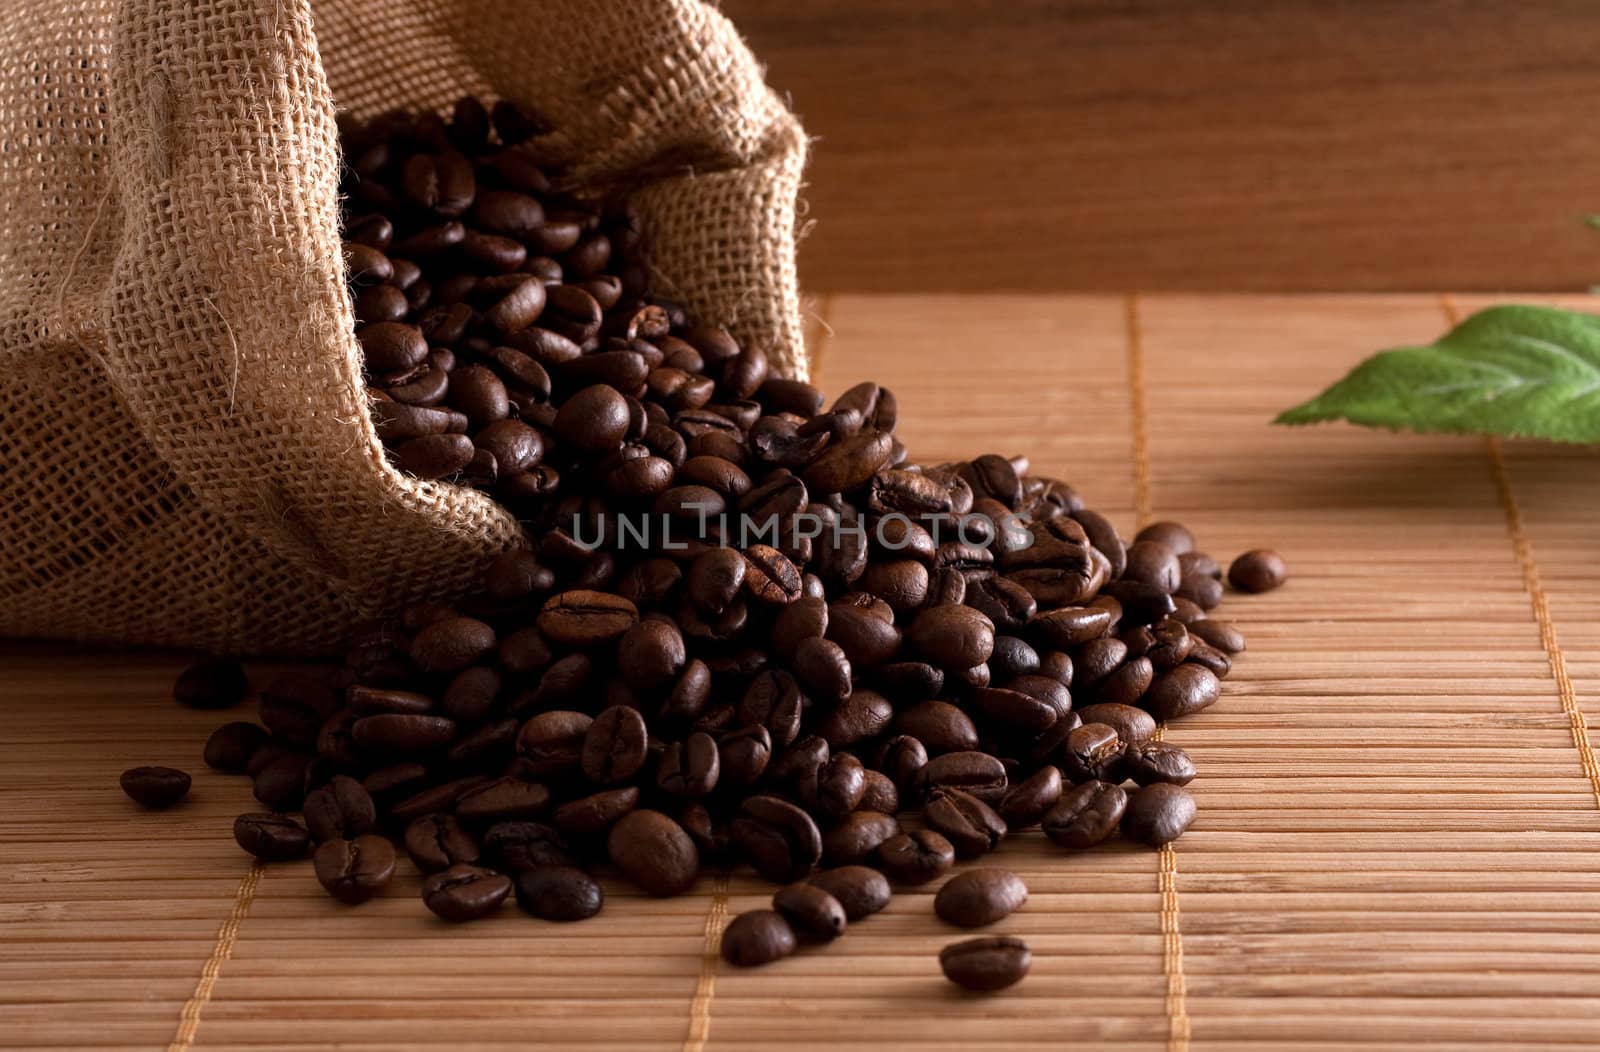 A bunch of coffee beans, falling out of a sack on a wooden background